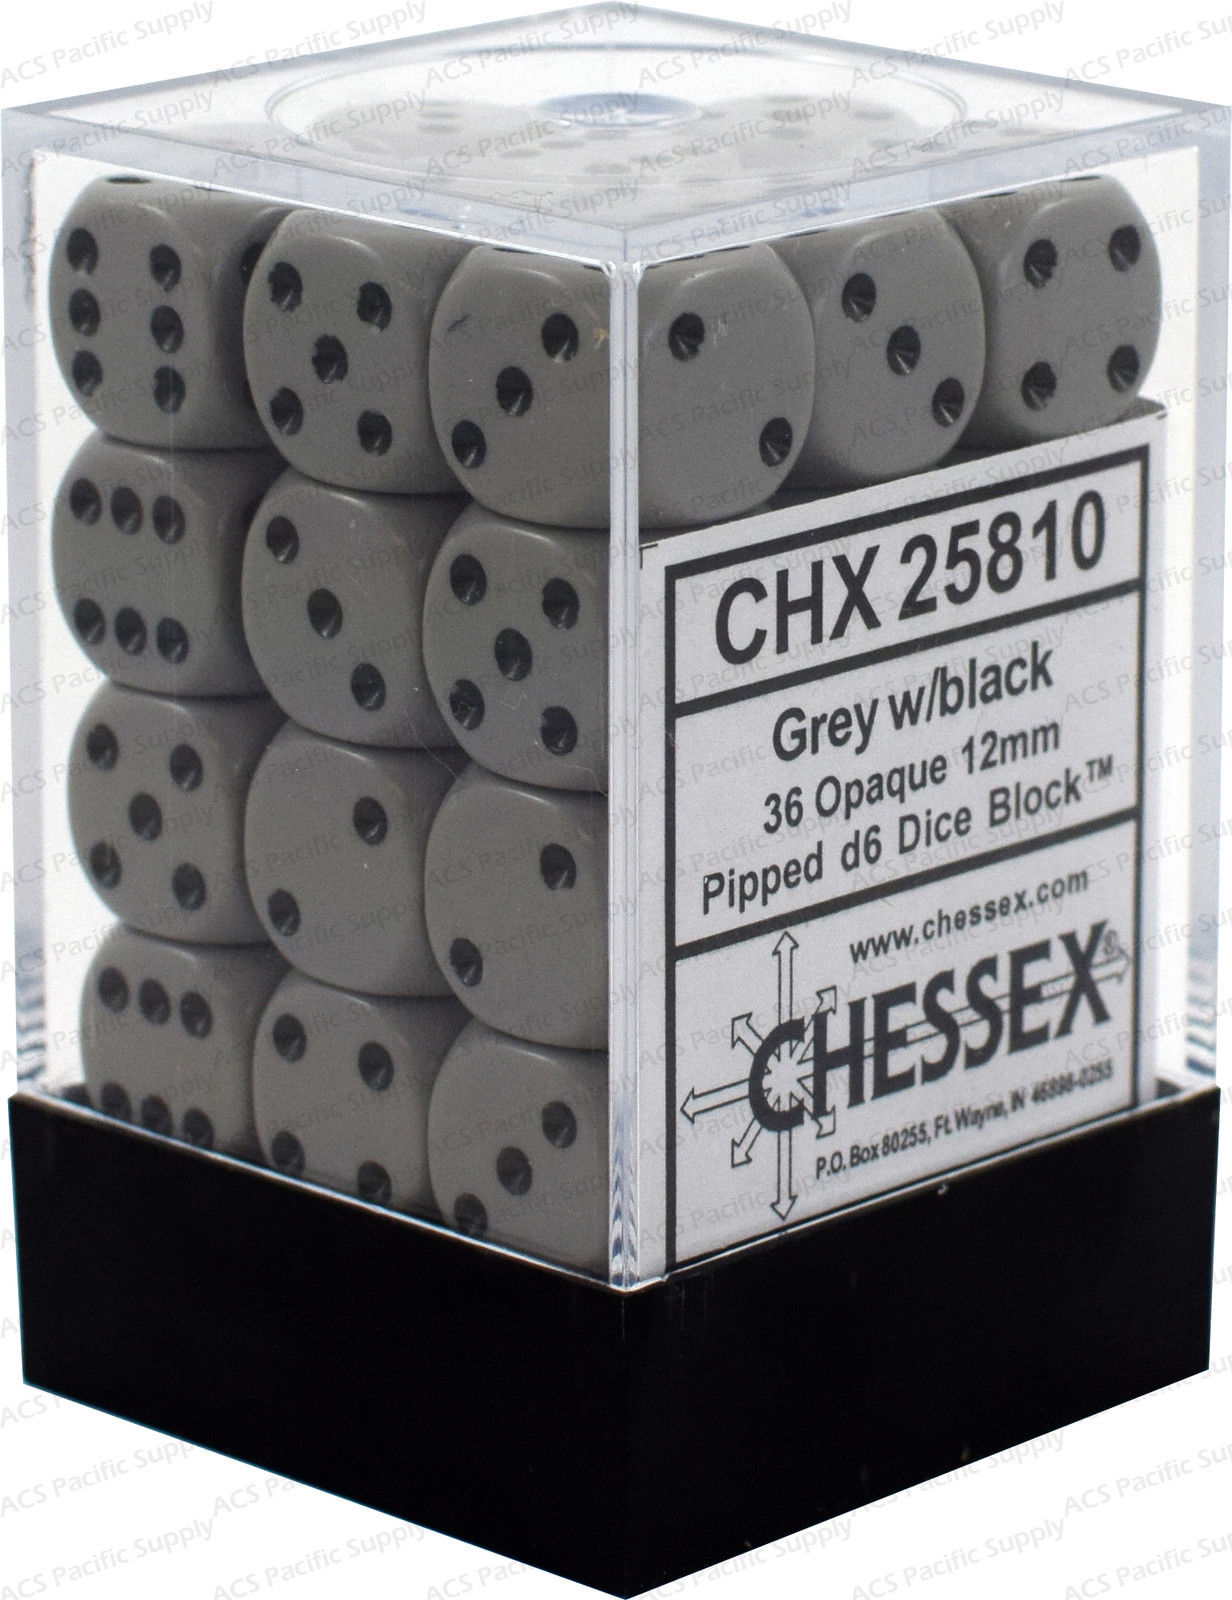 Chessex Opaque 36x 12mm Dice Grey with Black